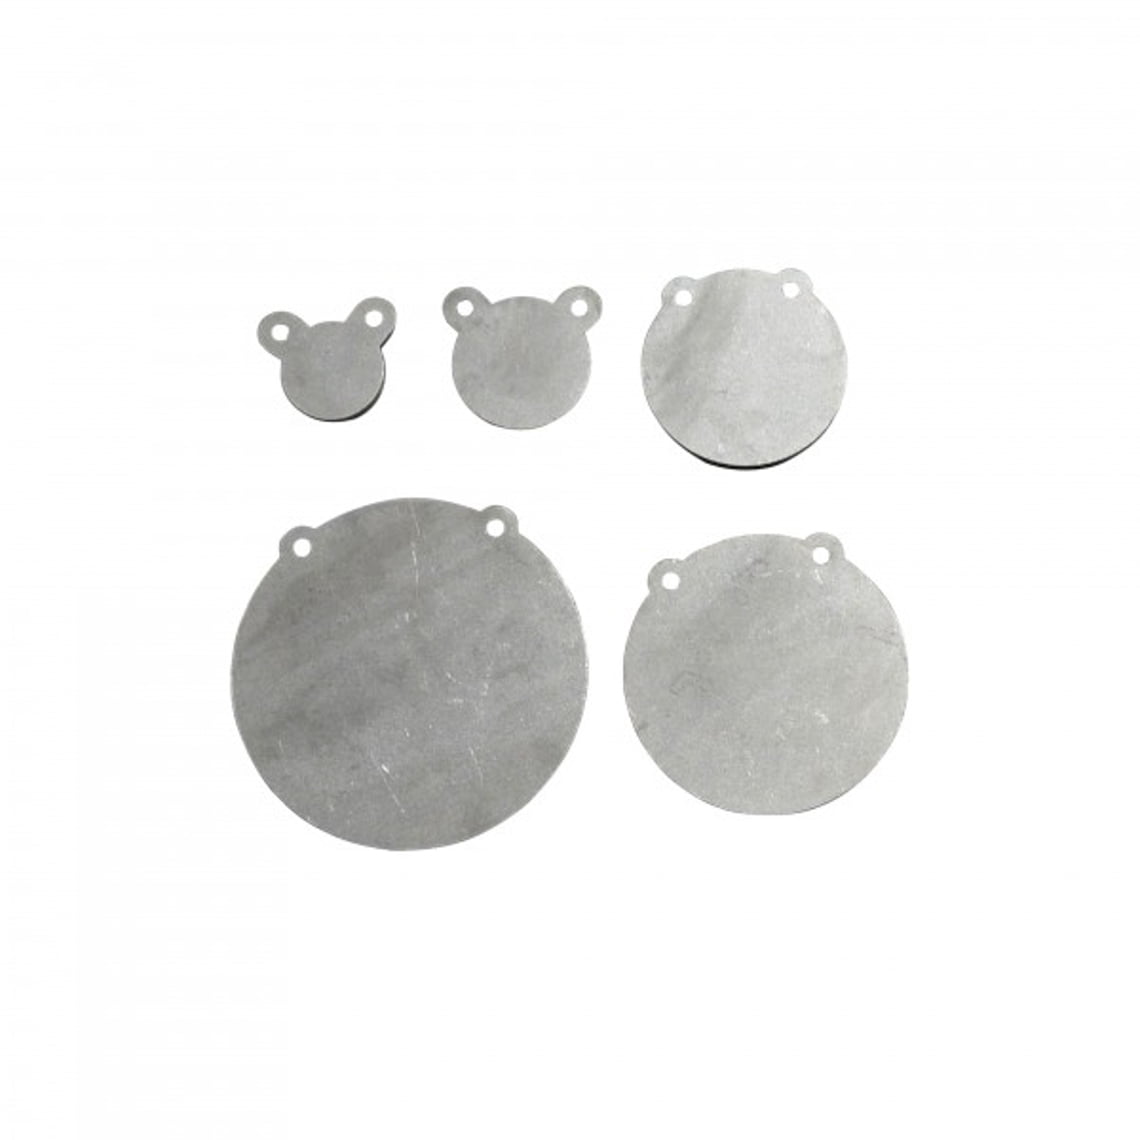 USA MADE! AR500 Steel Targets Hanging Gong 2" x 1/4 Set of 6 Double Ear Plates 